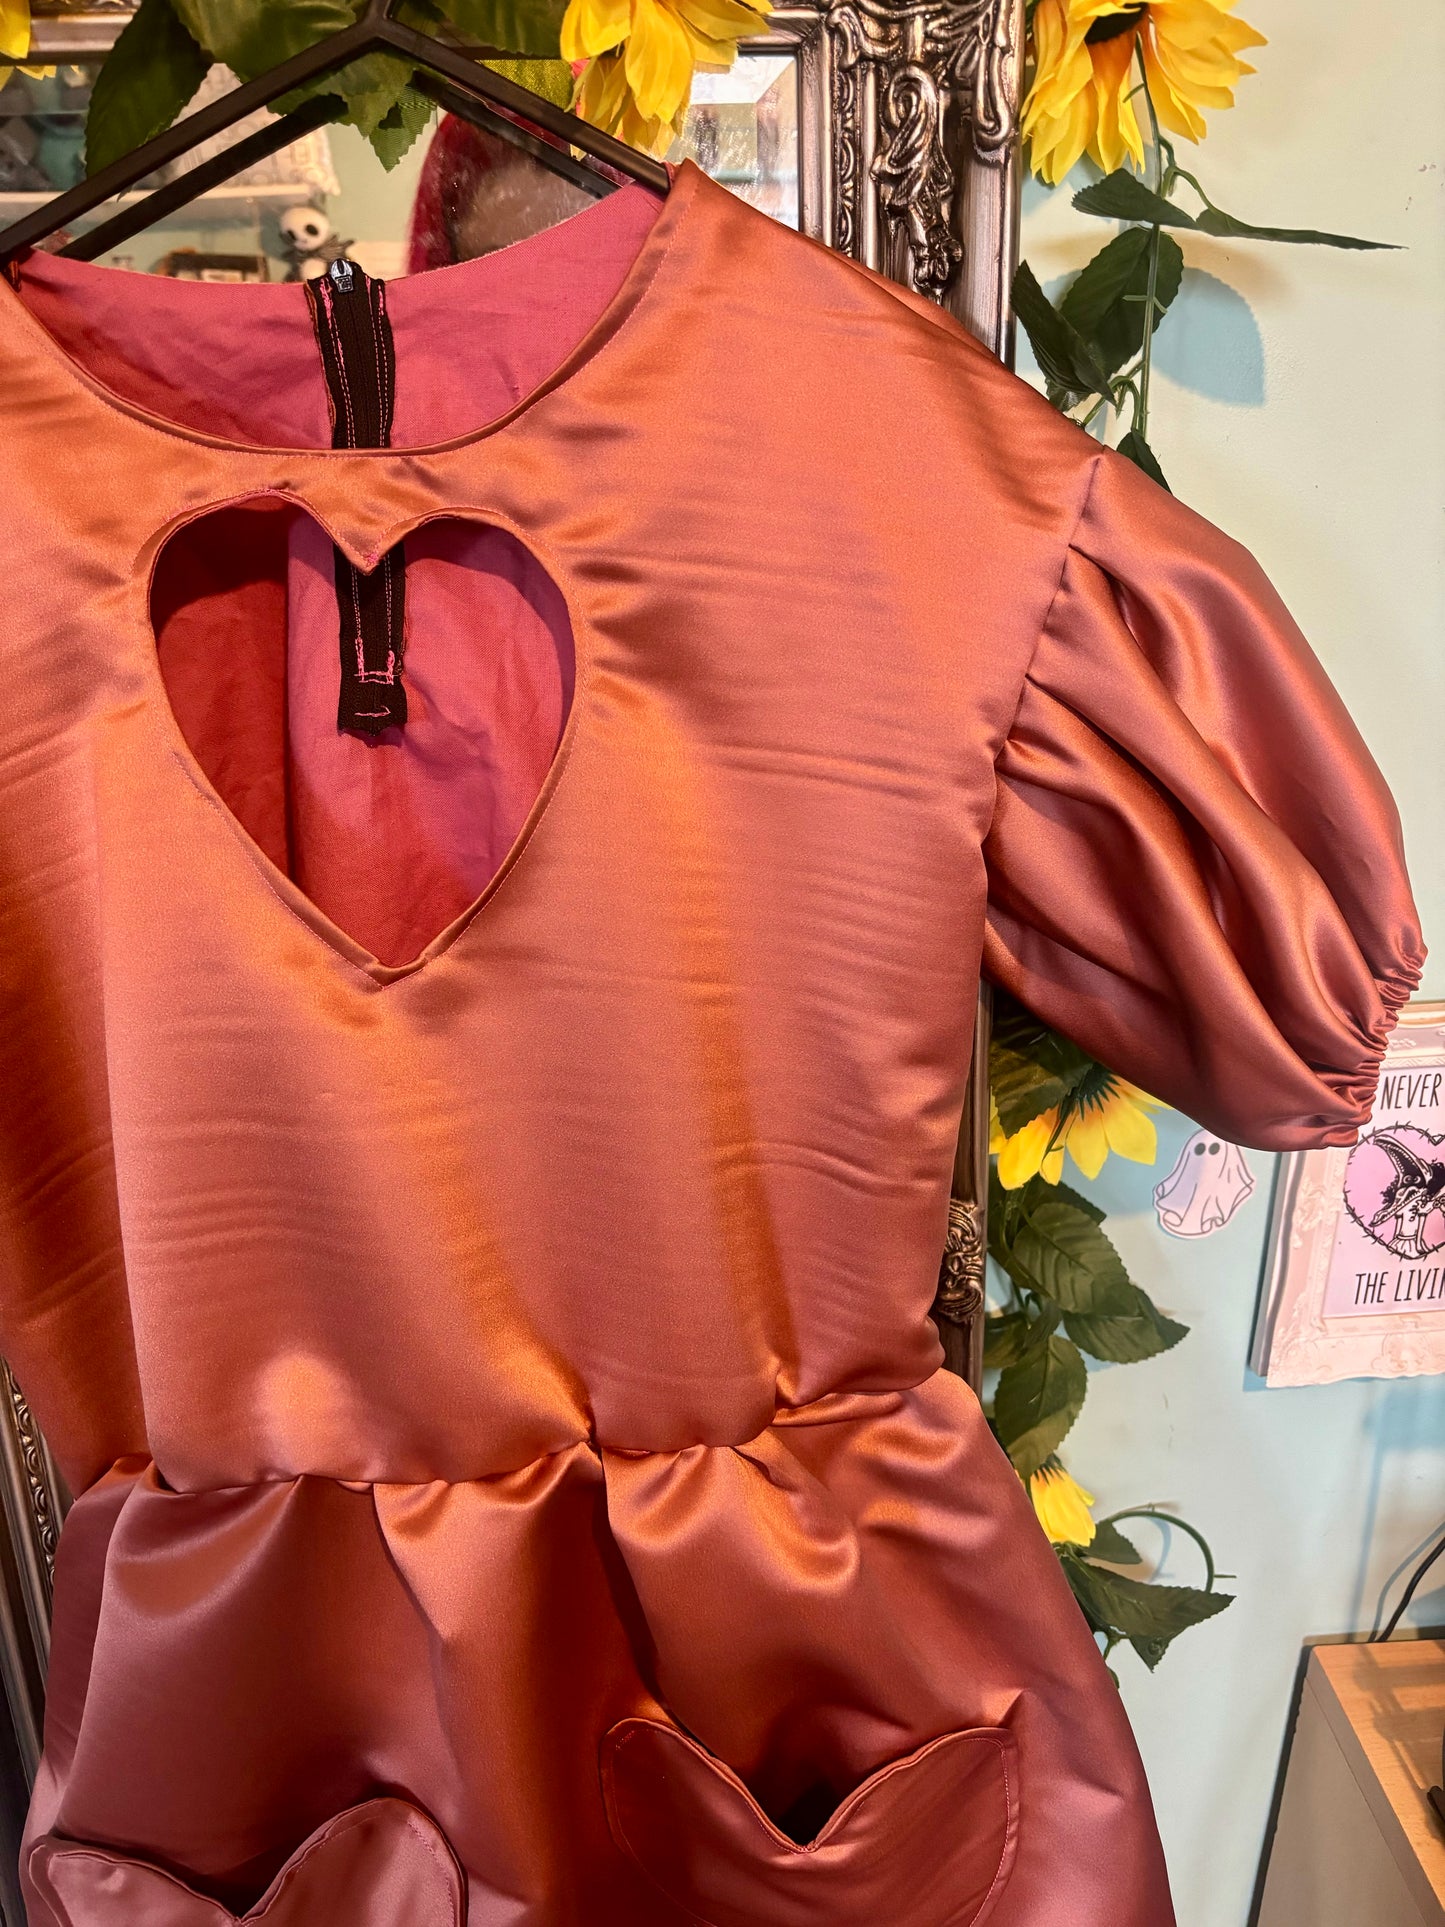 Piece of my Heart Dress - Any Colour duchess silk fabric (pictured is dusky rose)